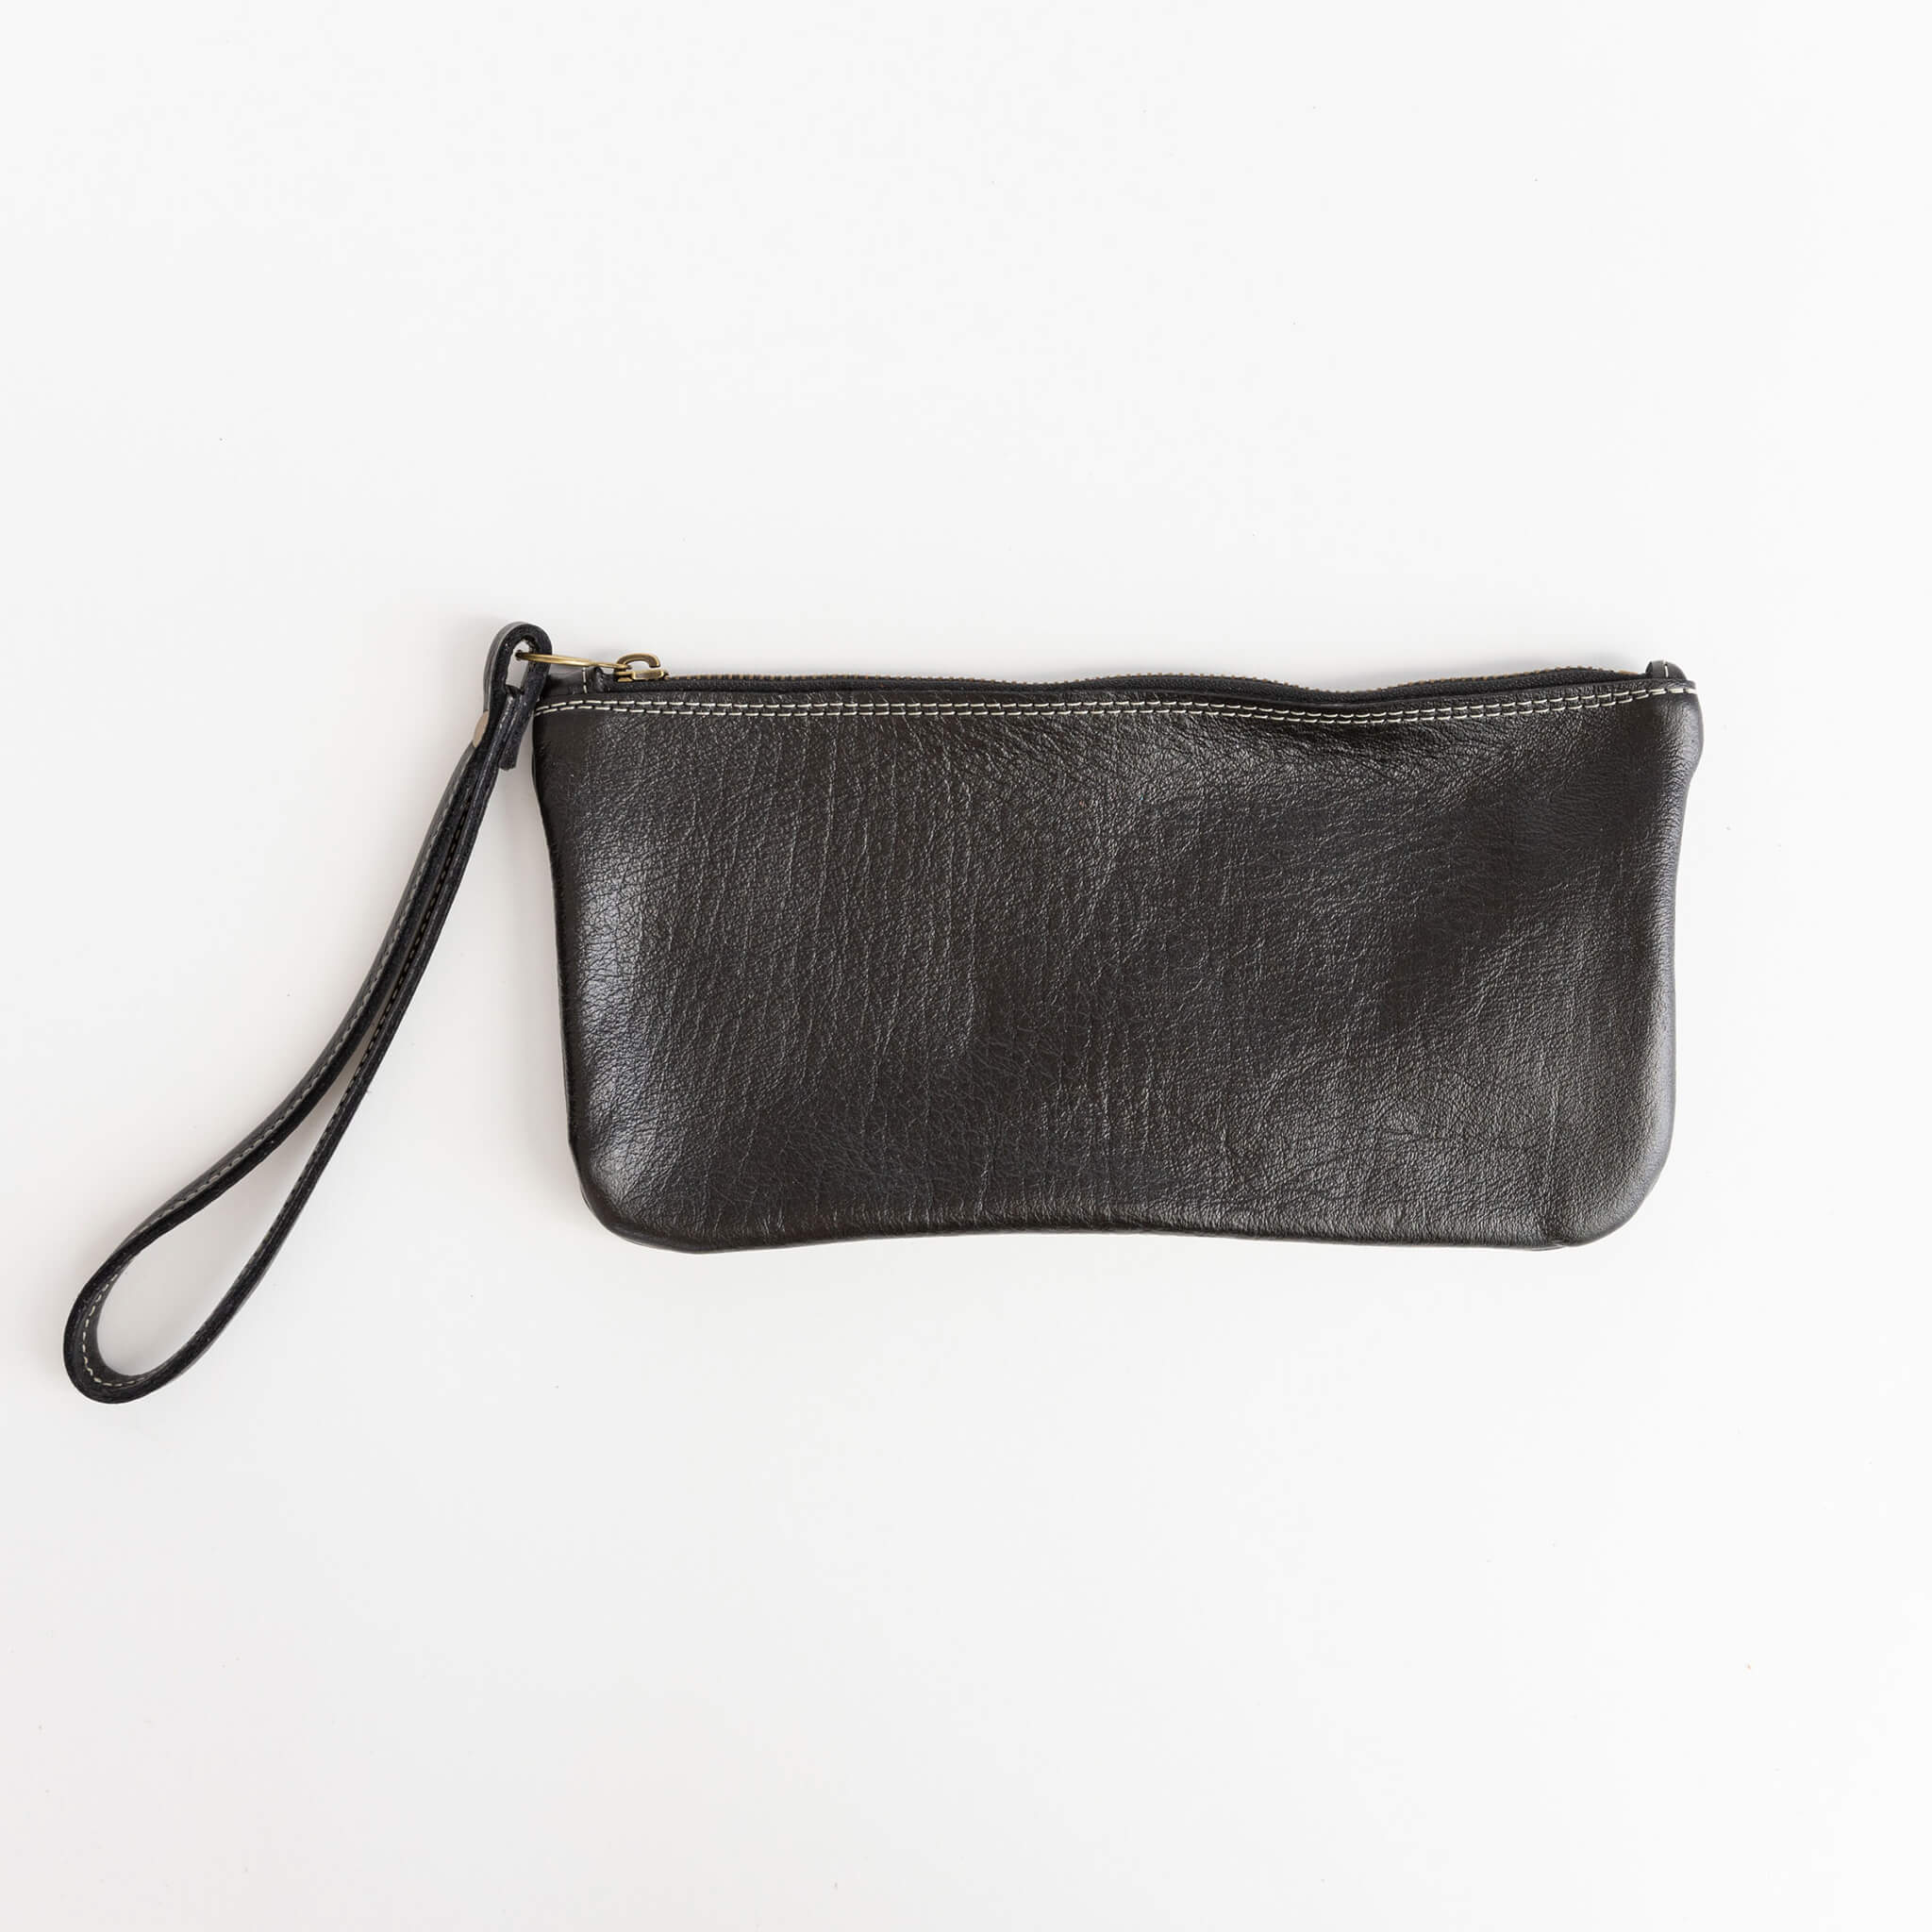 francis clutch - wristlet - handmade leather - black front view